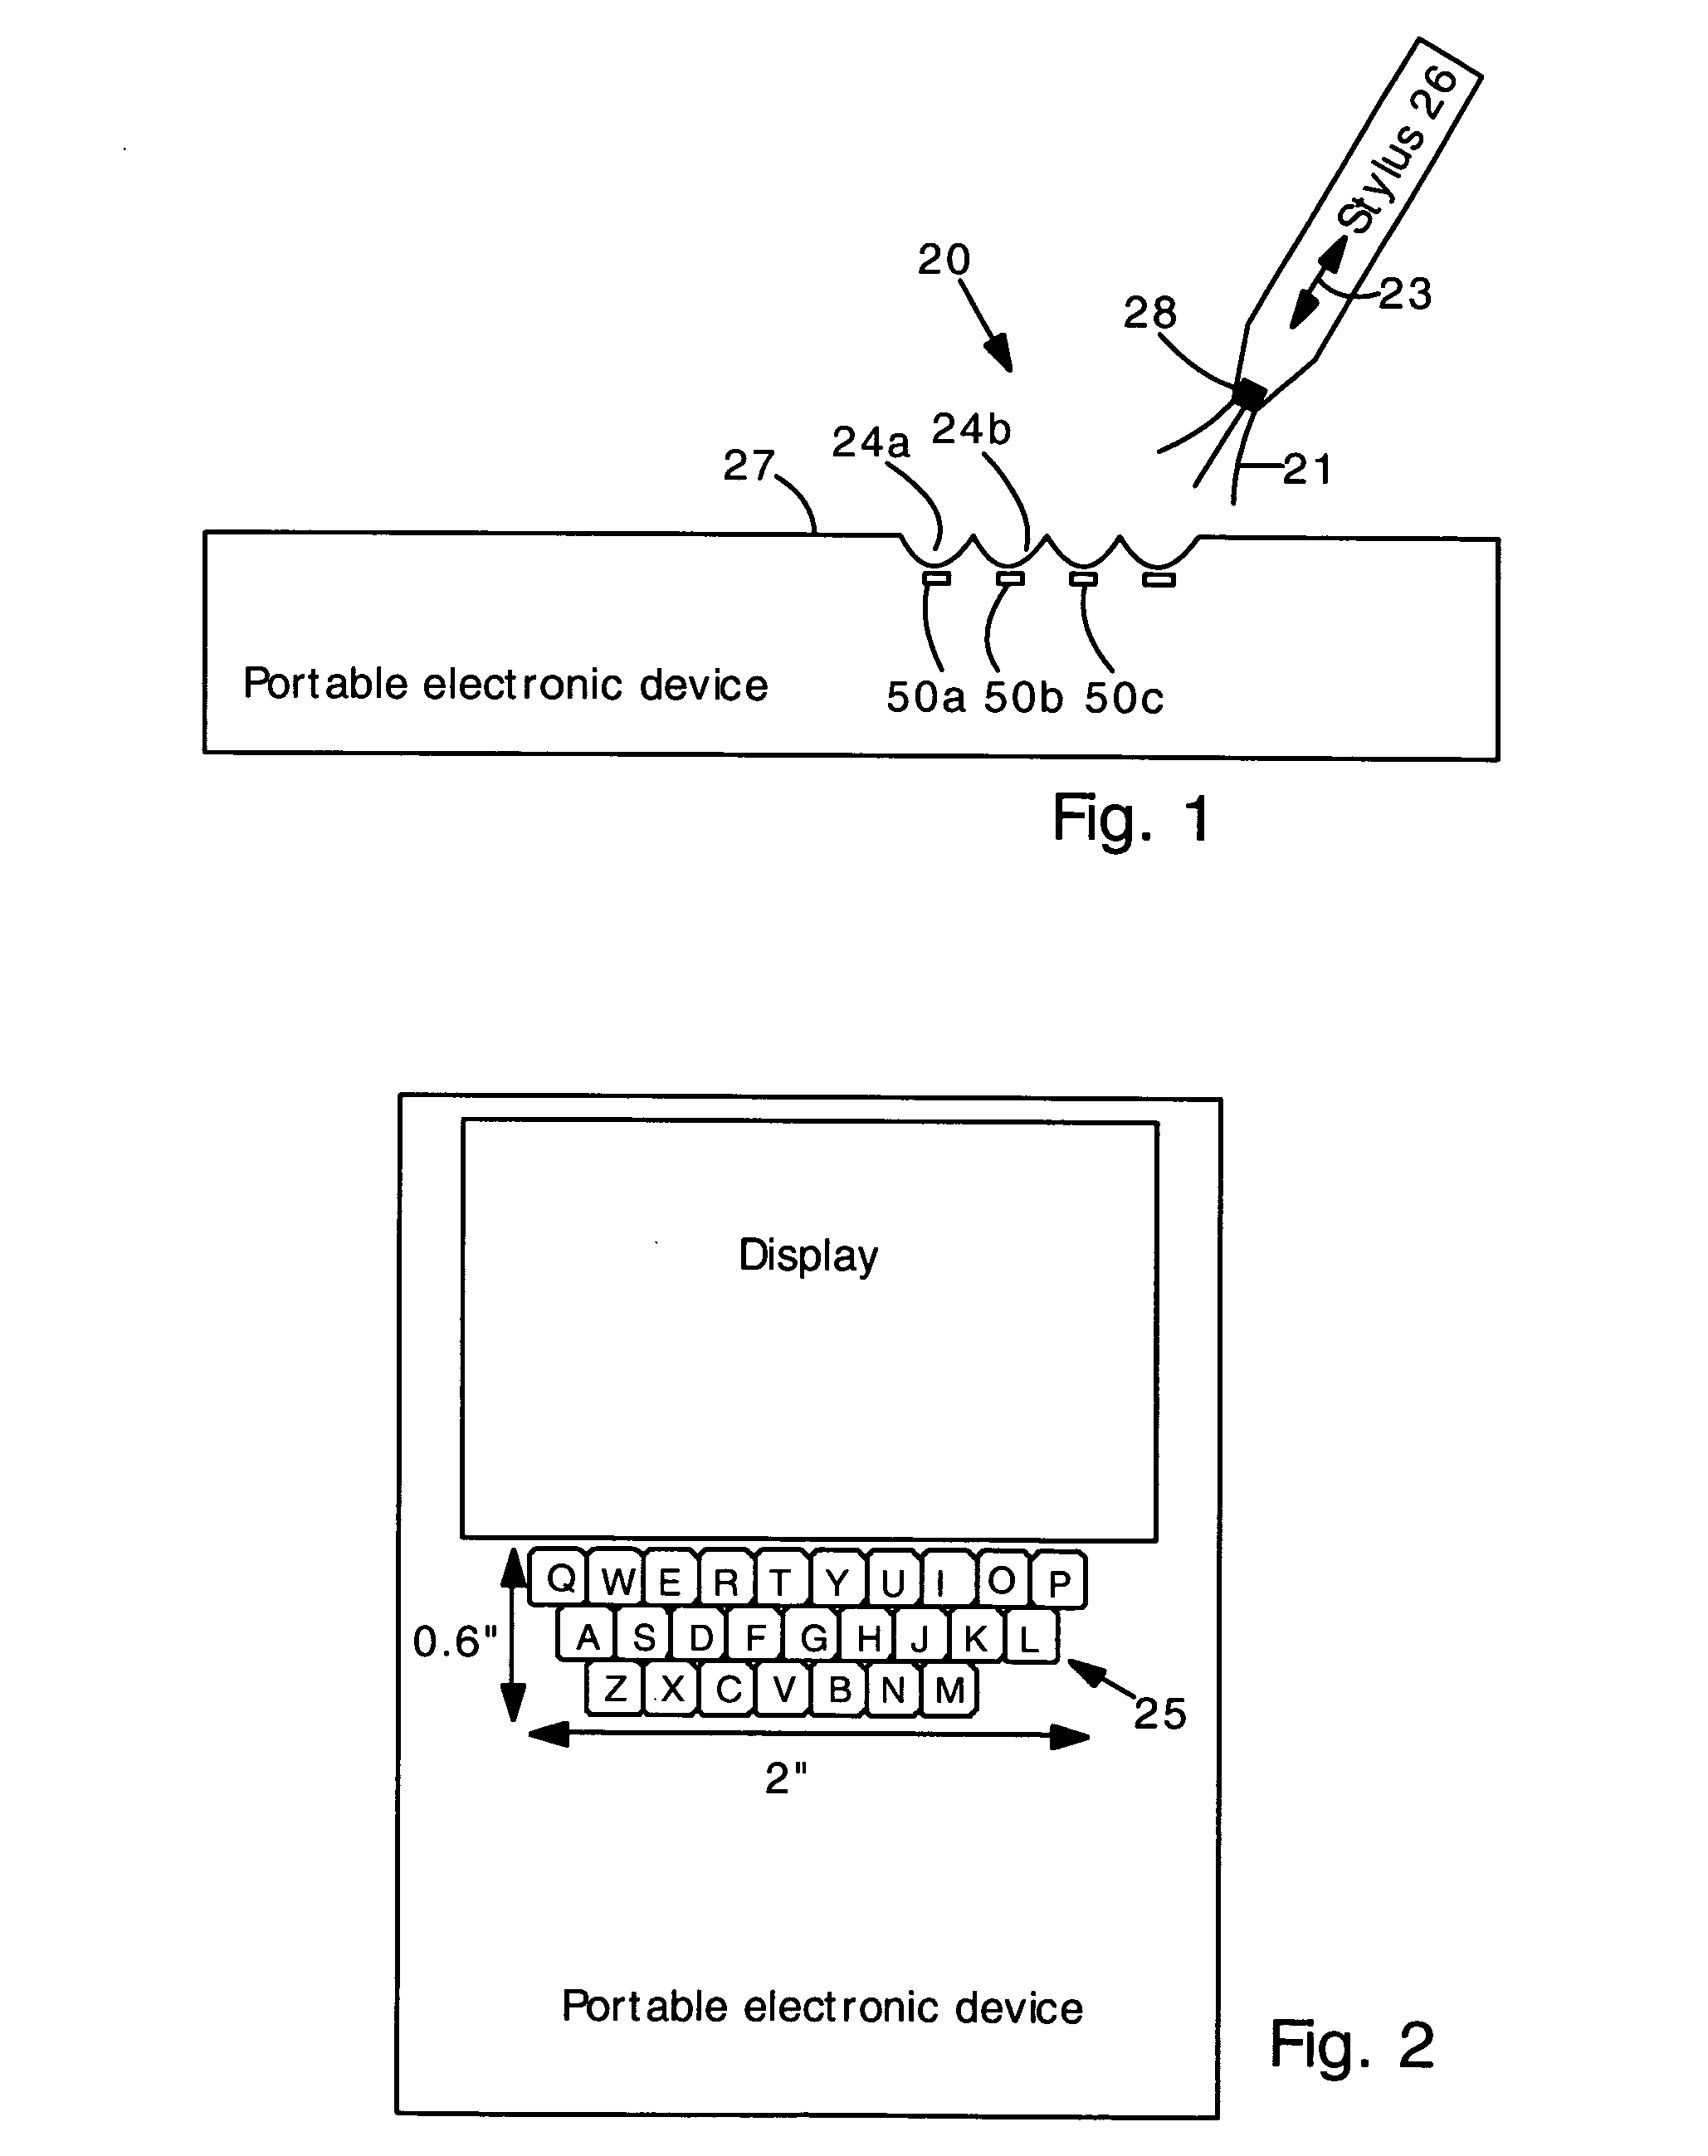 Keyboard having magnet-actuated switches or sensors